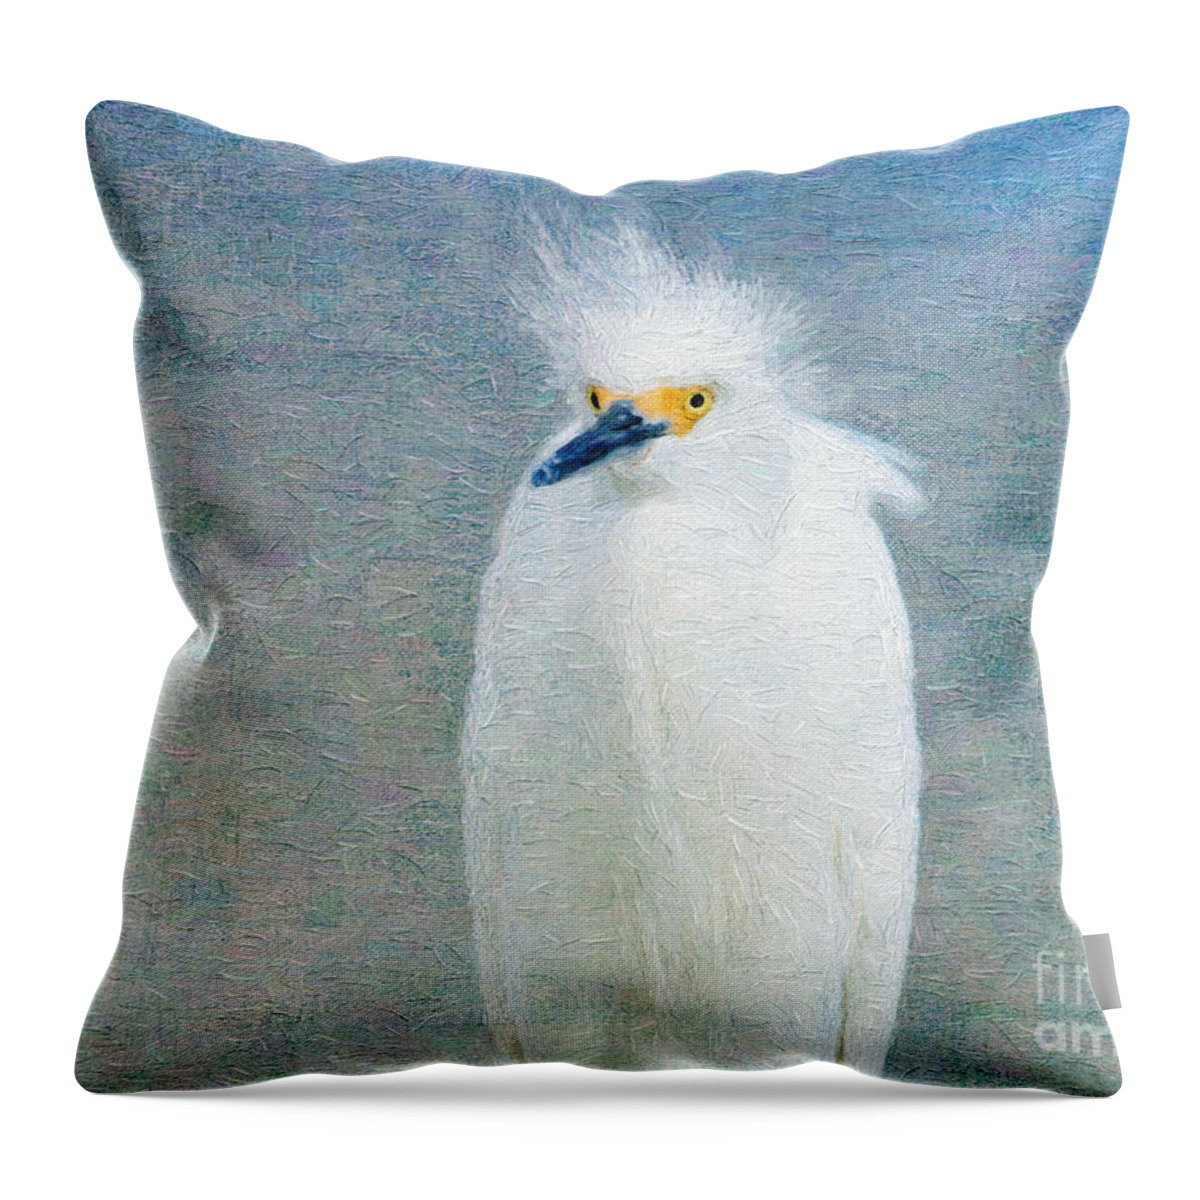 Snowy Egret Throw Pillow featuring the digital art Bad Hair Day by Jayne Carney